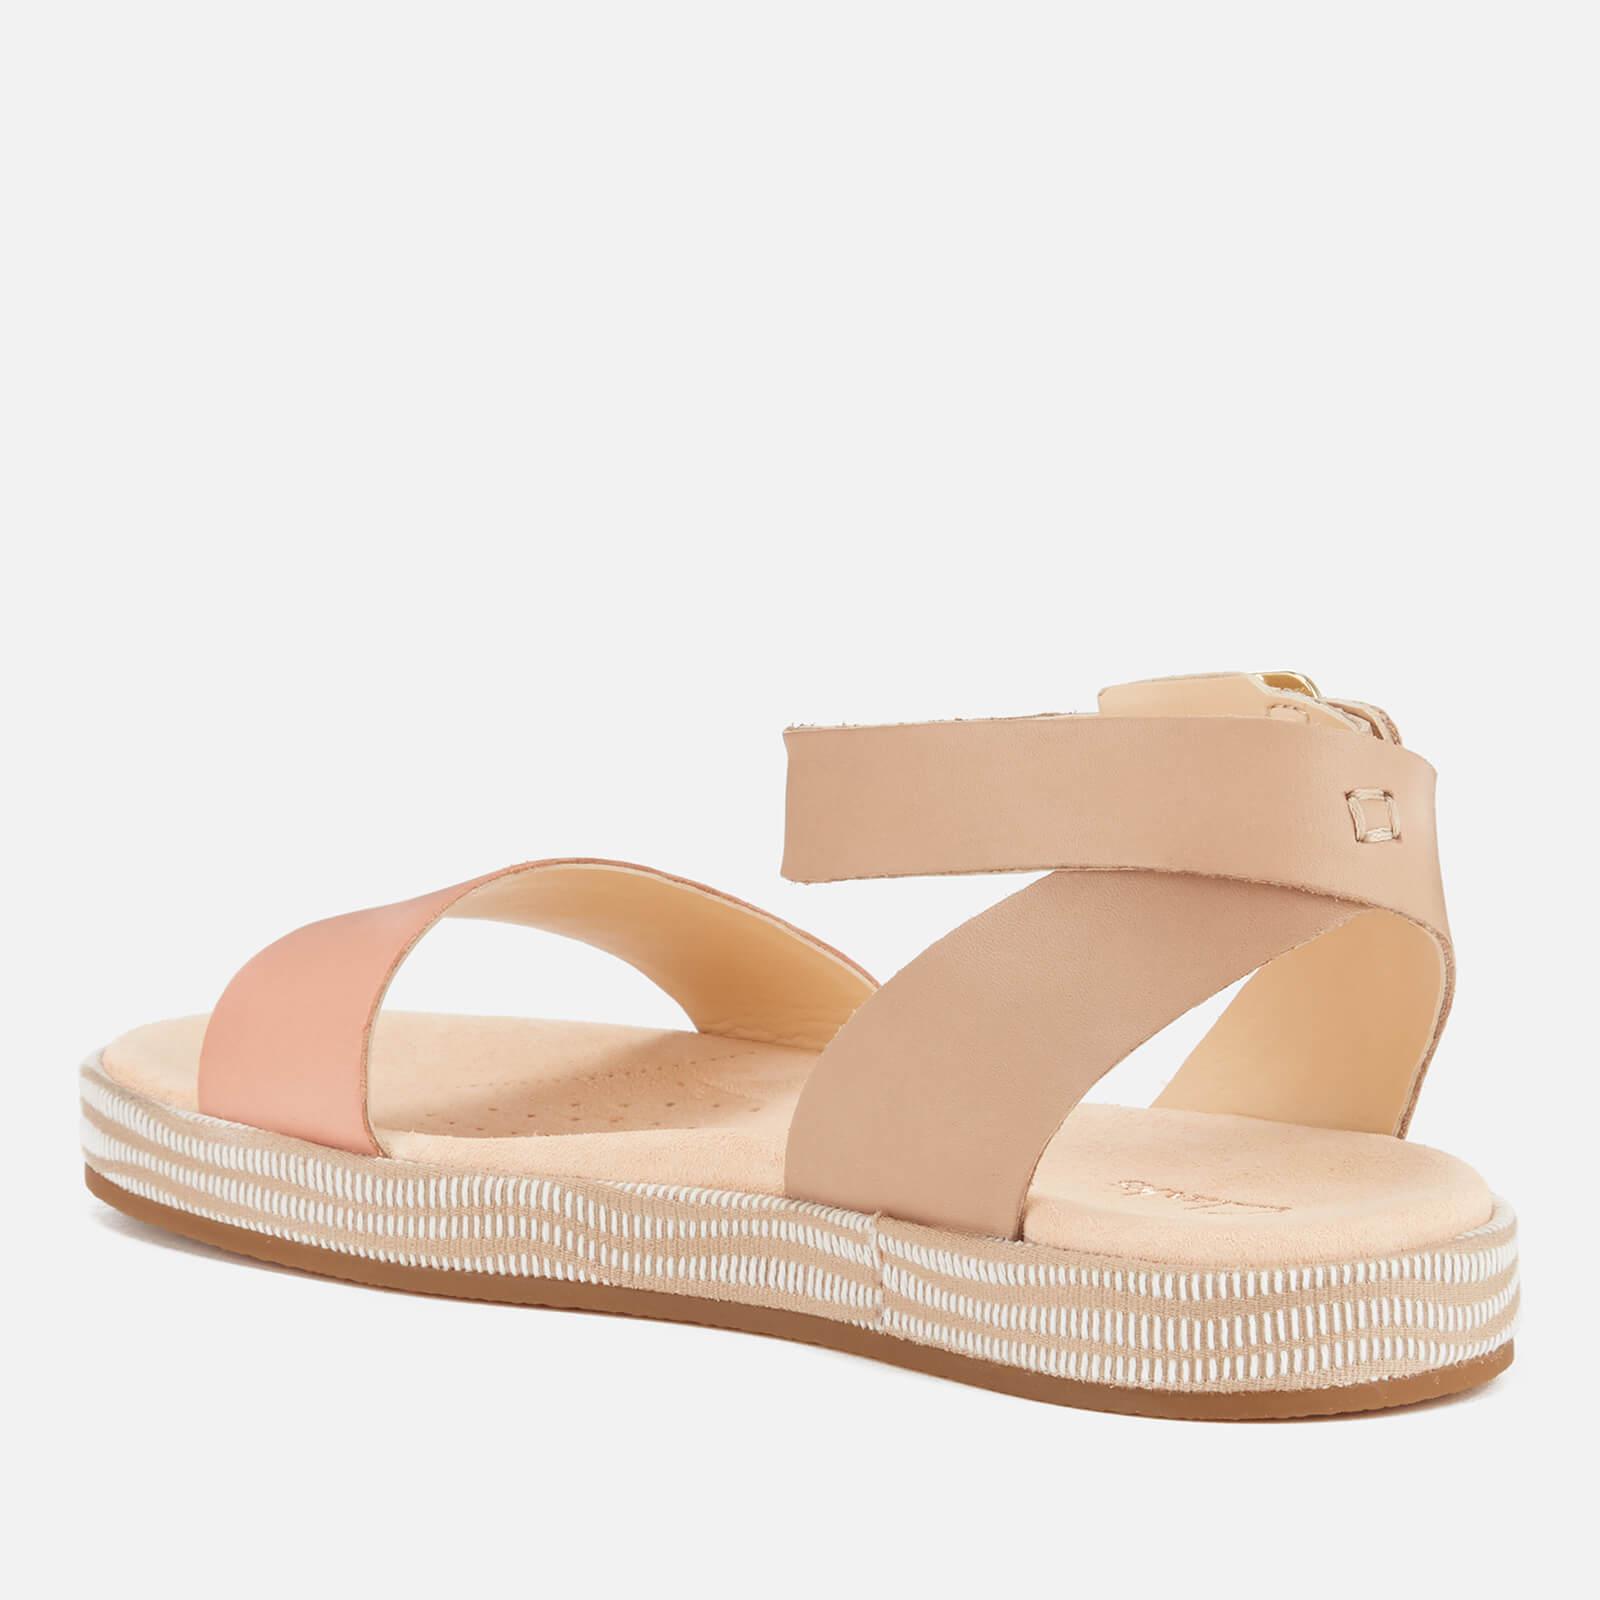 Clarks Botanic Ivy Double Strap Flat Sandals in Pink | Lyst